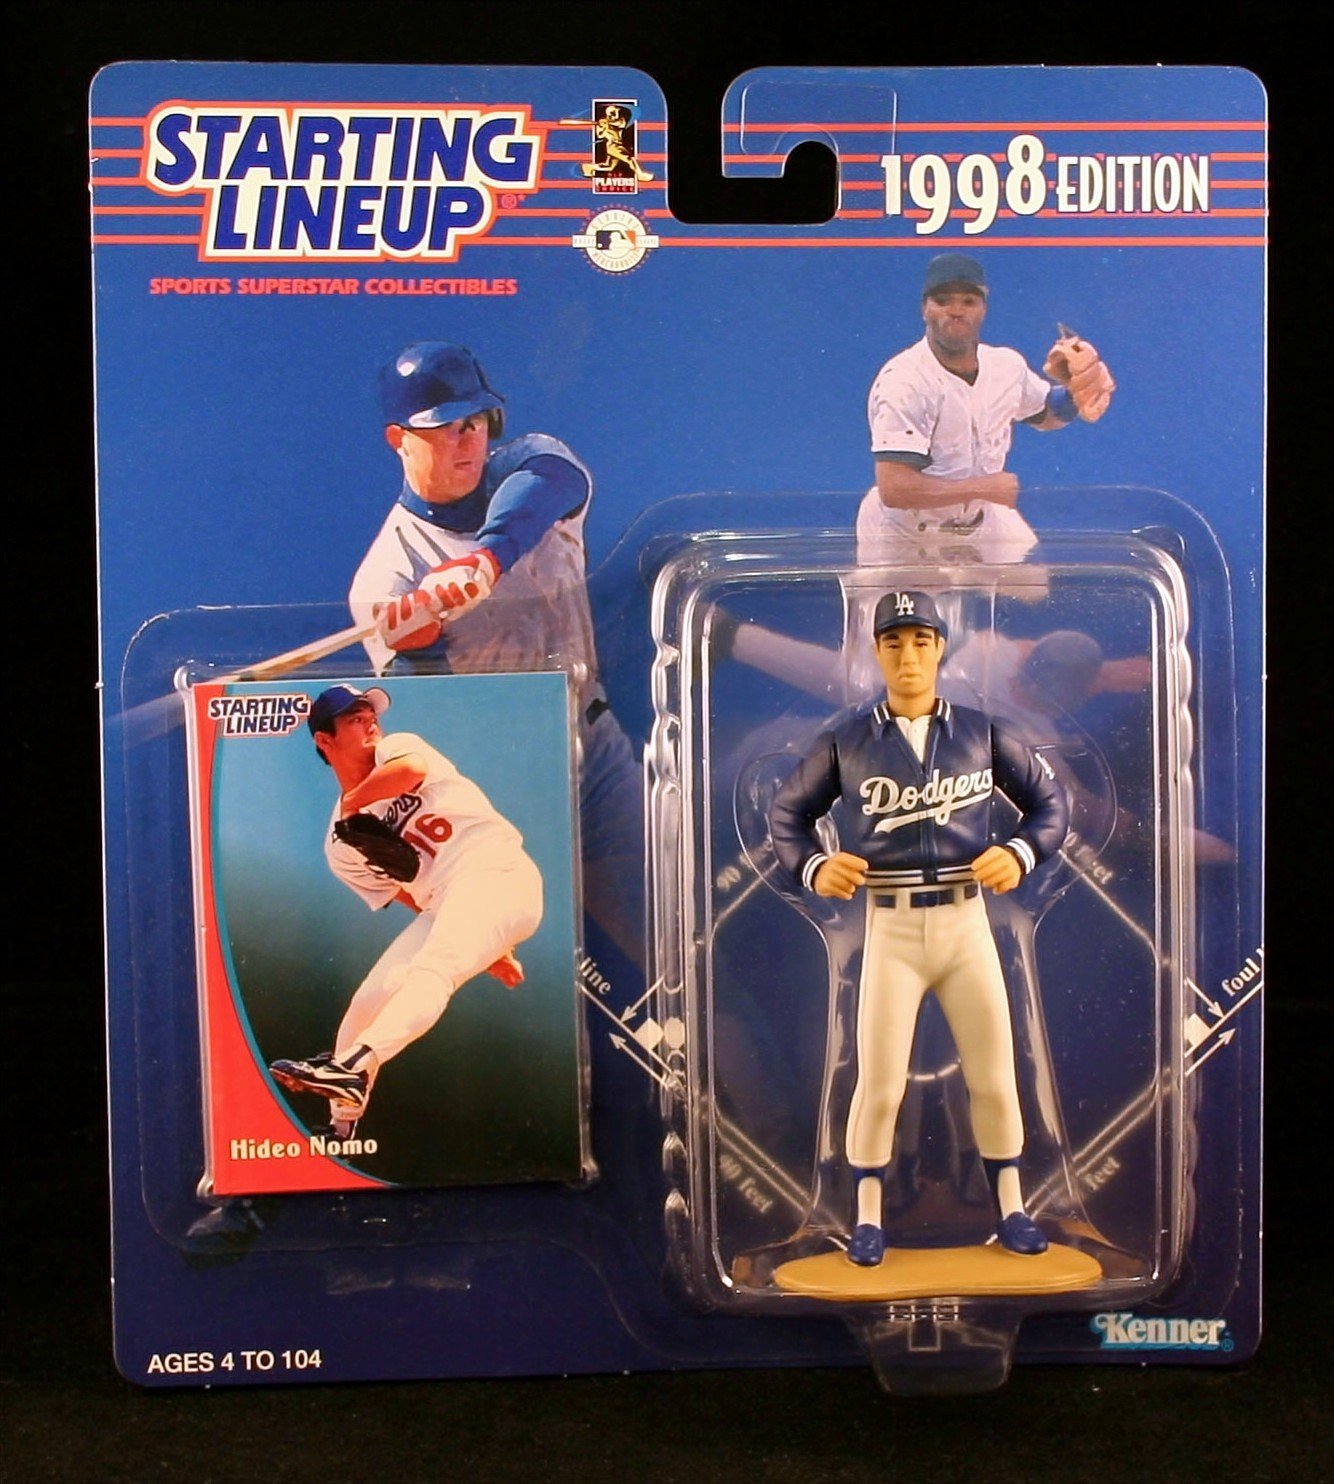 HIDEO NOMO / LOS ANGELES DODGERS 1998 MLB Starting Lineup Action Figure & Exclusive Collector Trading Card